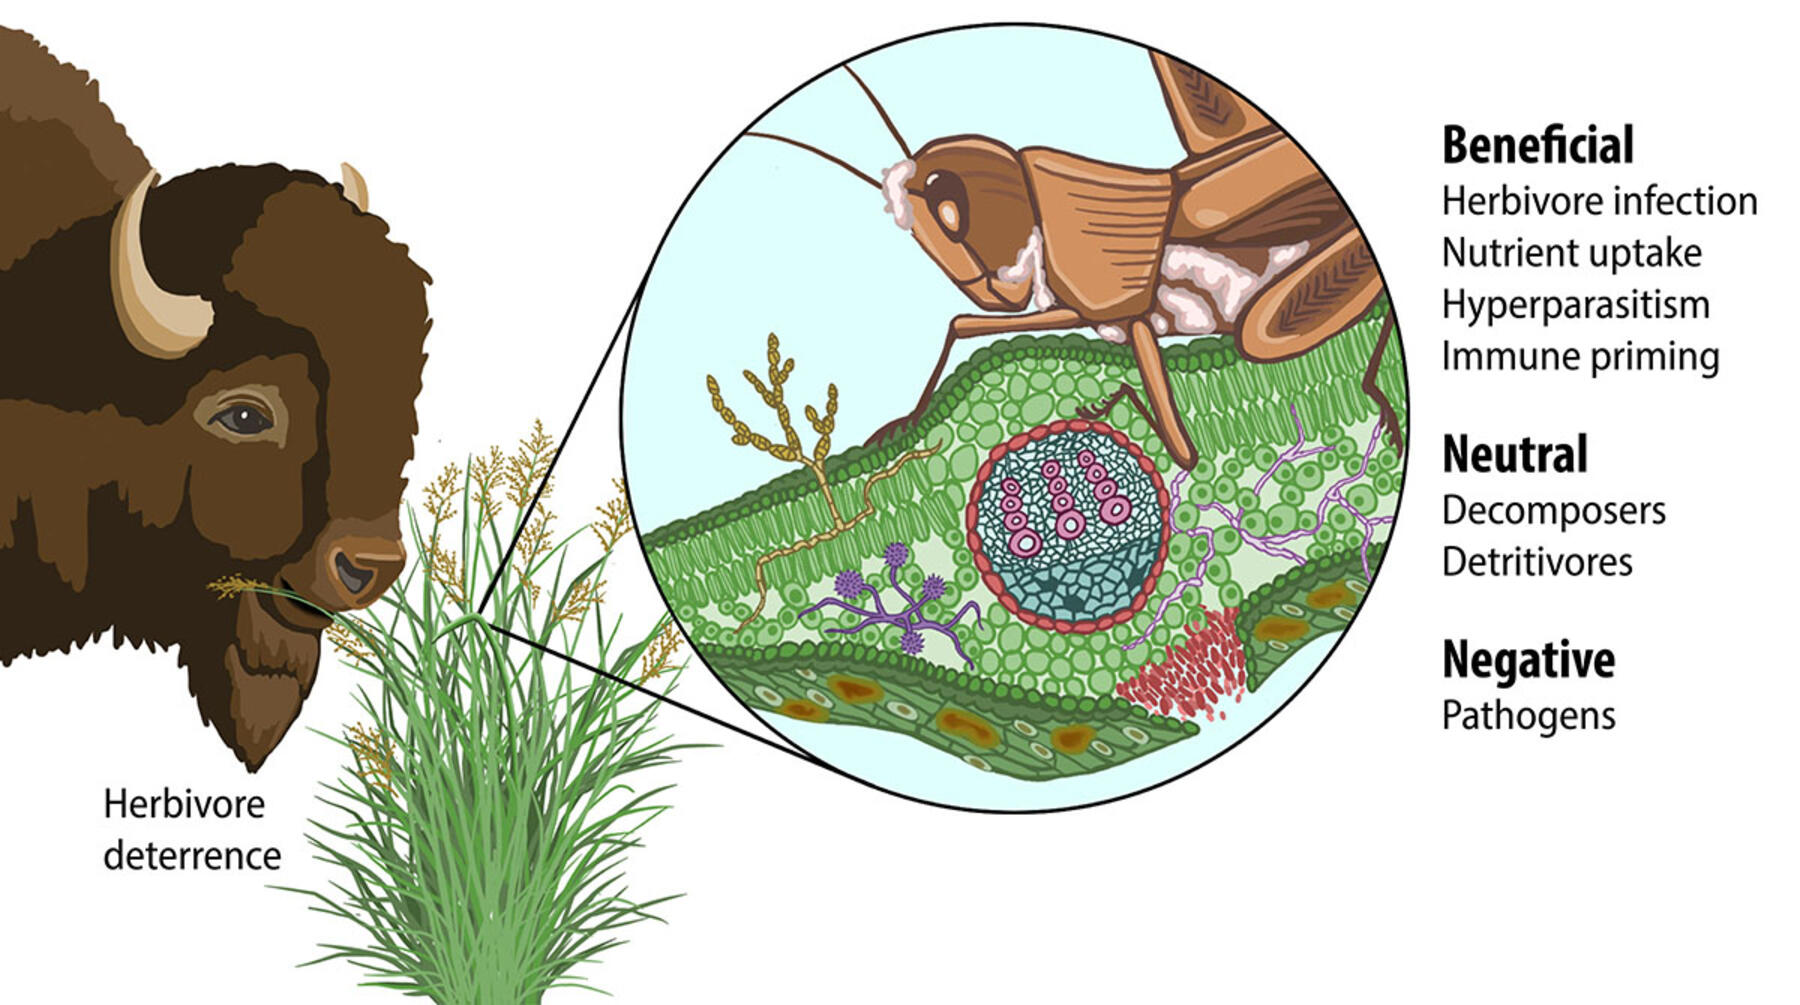 An illustration shows the ranging roles fungi can have for switchgrass. A bison stands next to a patch of switchgrass on the left with text reading, “herbivore deterrence.” An inset on the right shows a magnified view of the grass with a grasshopper resting on a blade. Text outlines several other relationships between the fungi and plant. Beneficial relationships include herbivore infection — shown on the grasshopper, which is covered in fuzzy white patches — nutrient uptake, hyperparasitism and immune priming. The neutral roles are decomposers and detritivores, and the negative role is pathogens.